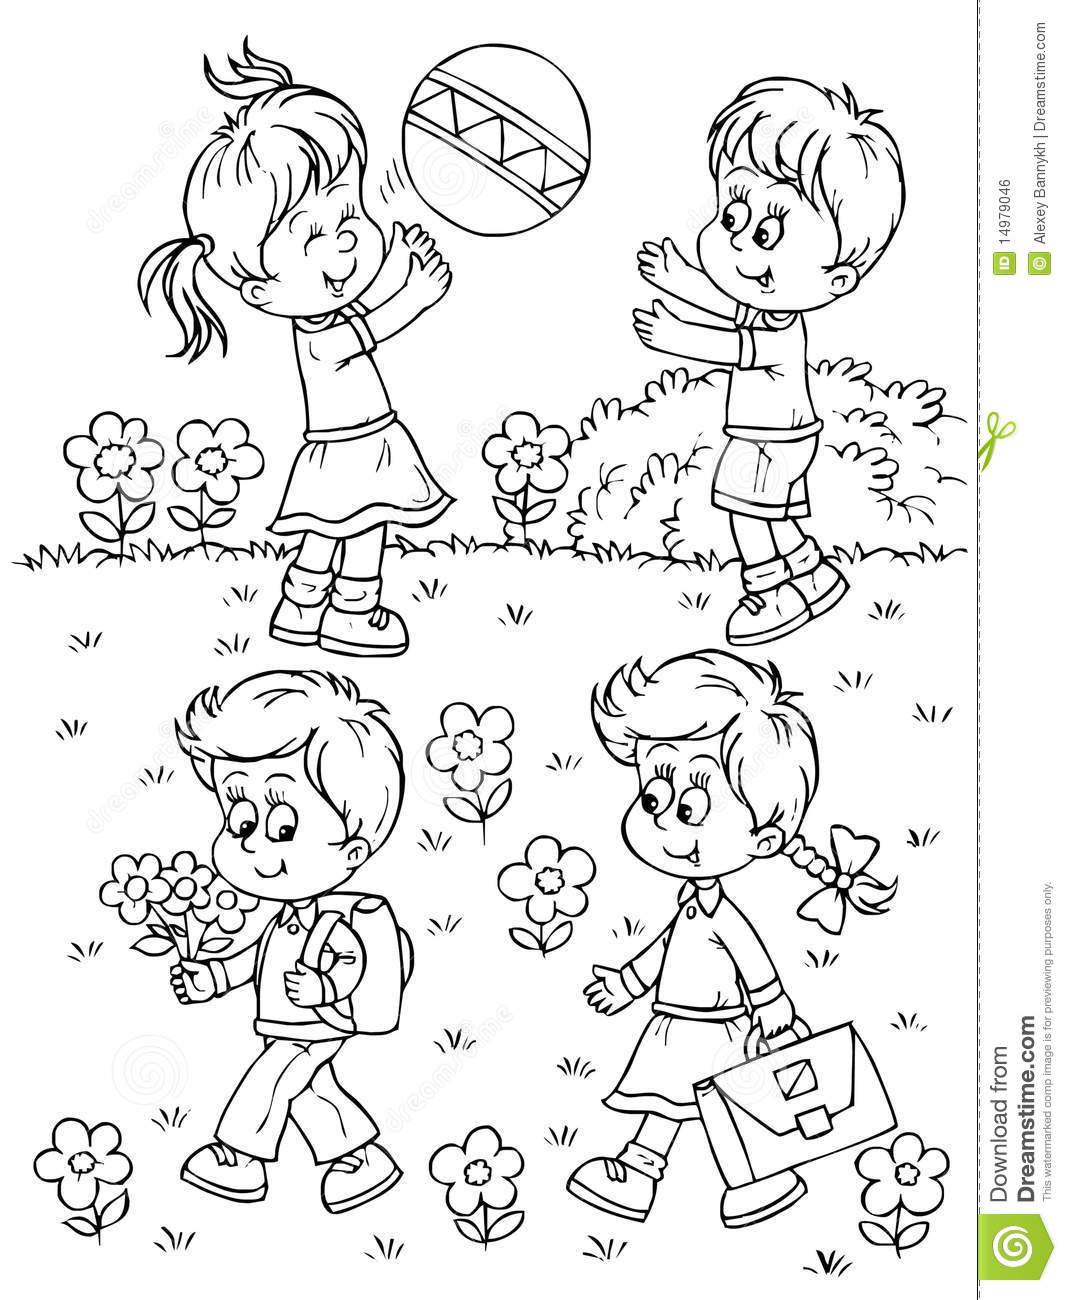 Kids Playing Coloring Pages
 Playing children stock illustration Illustration of